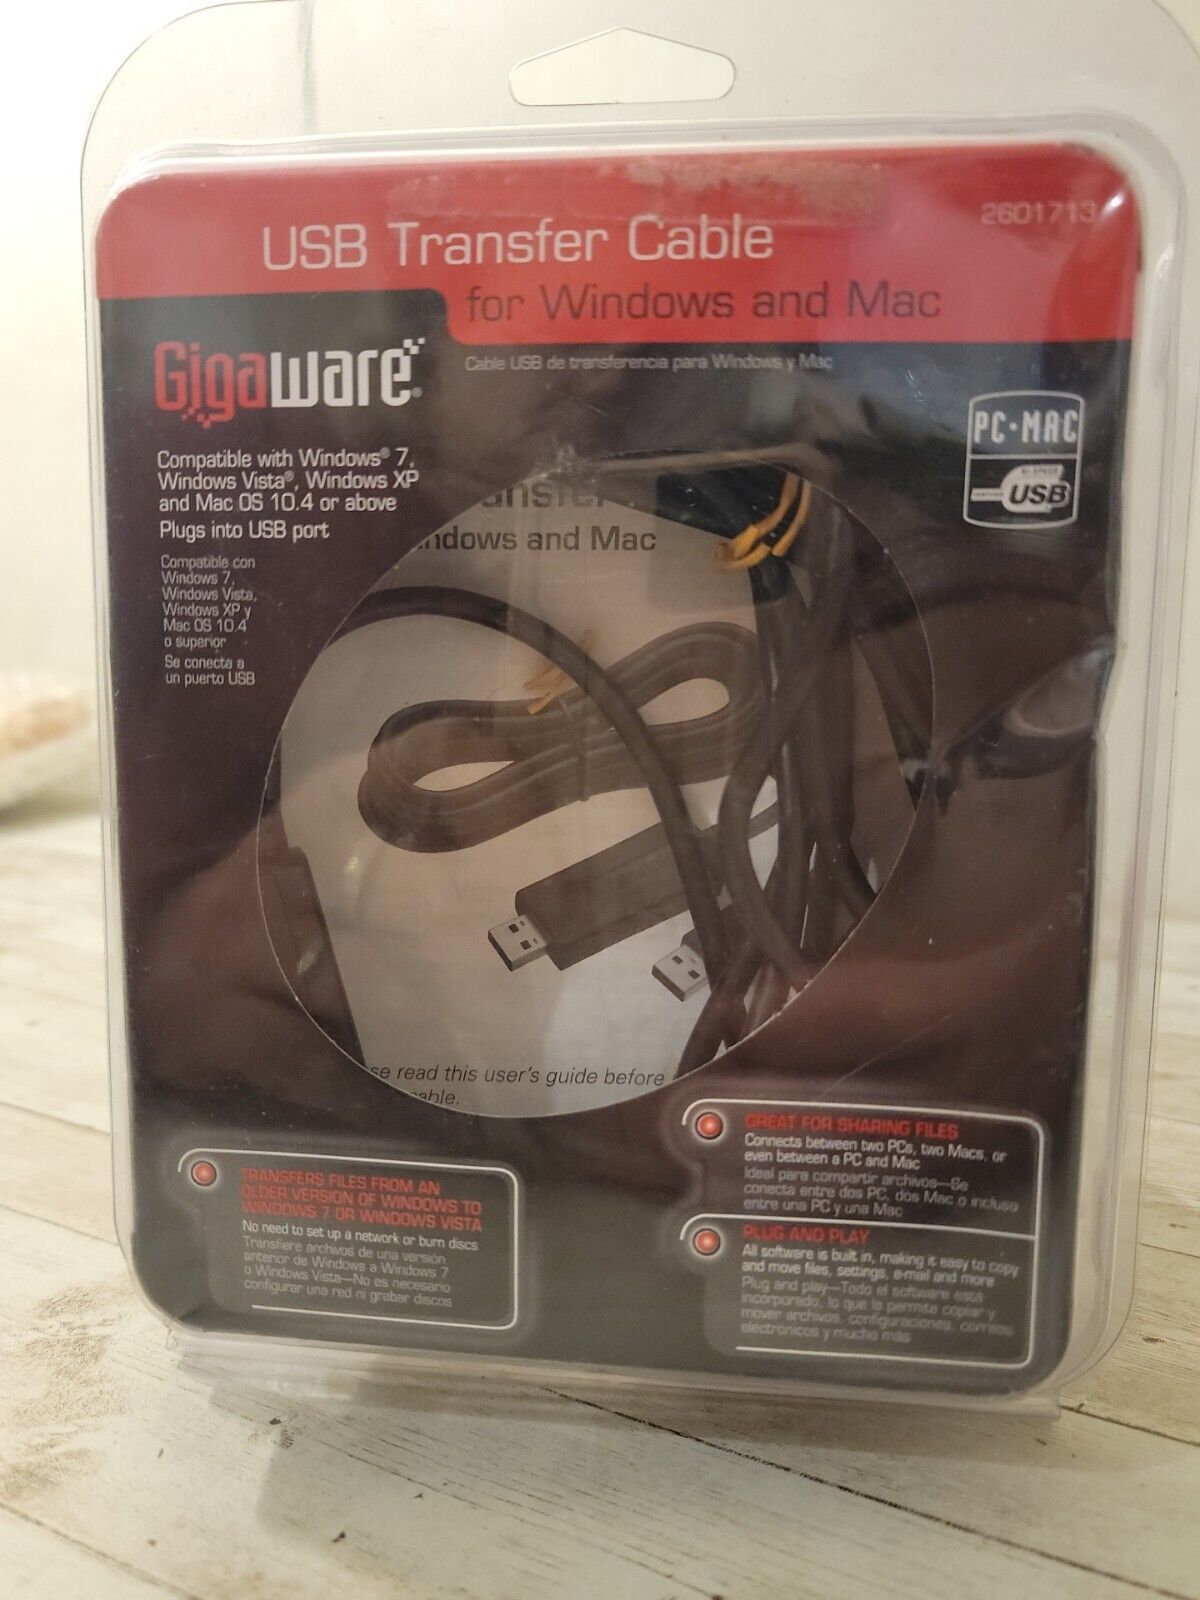 Gigaware USB Transfer Cable for Windows n Mac~Easily Copy or Move Files~2601713